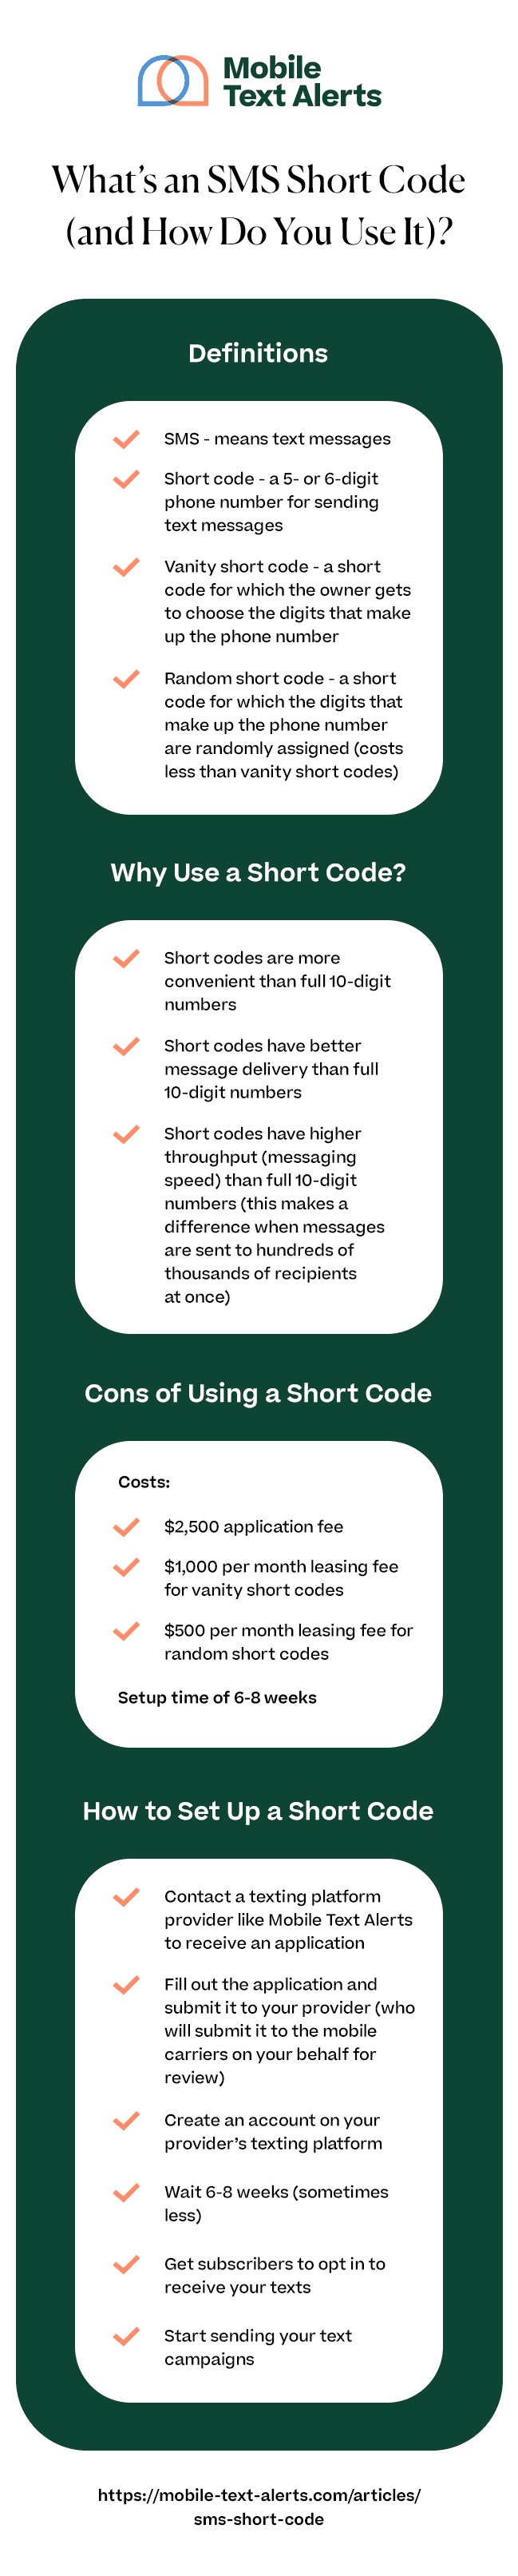 What is an sms short code